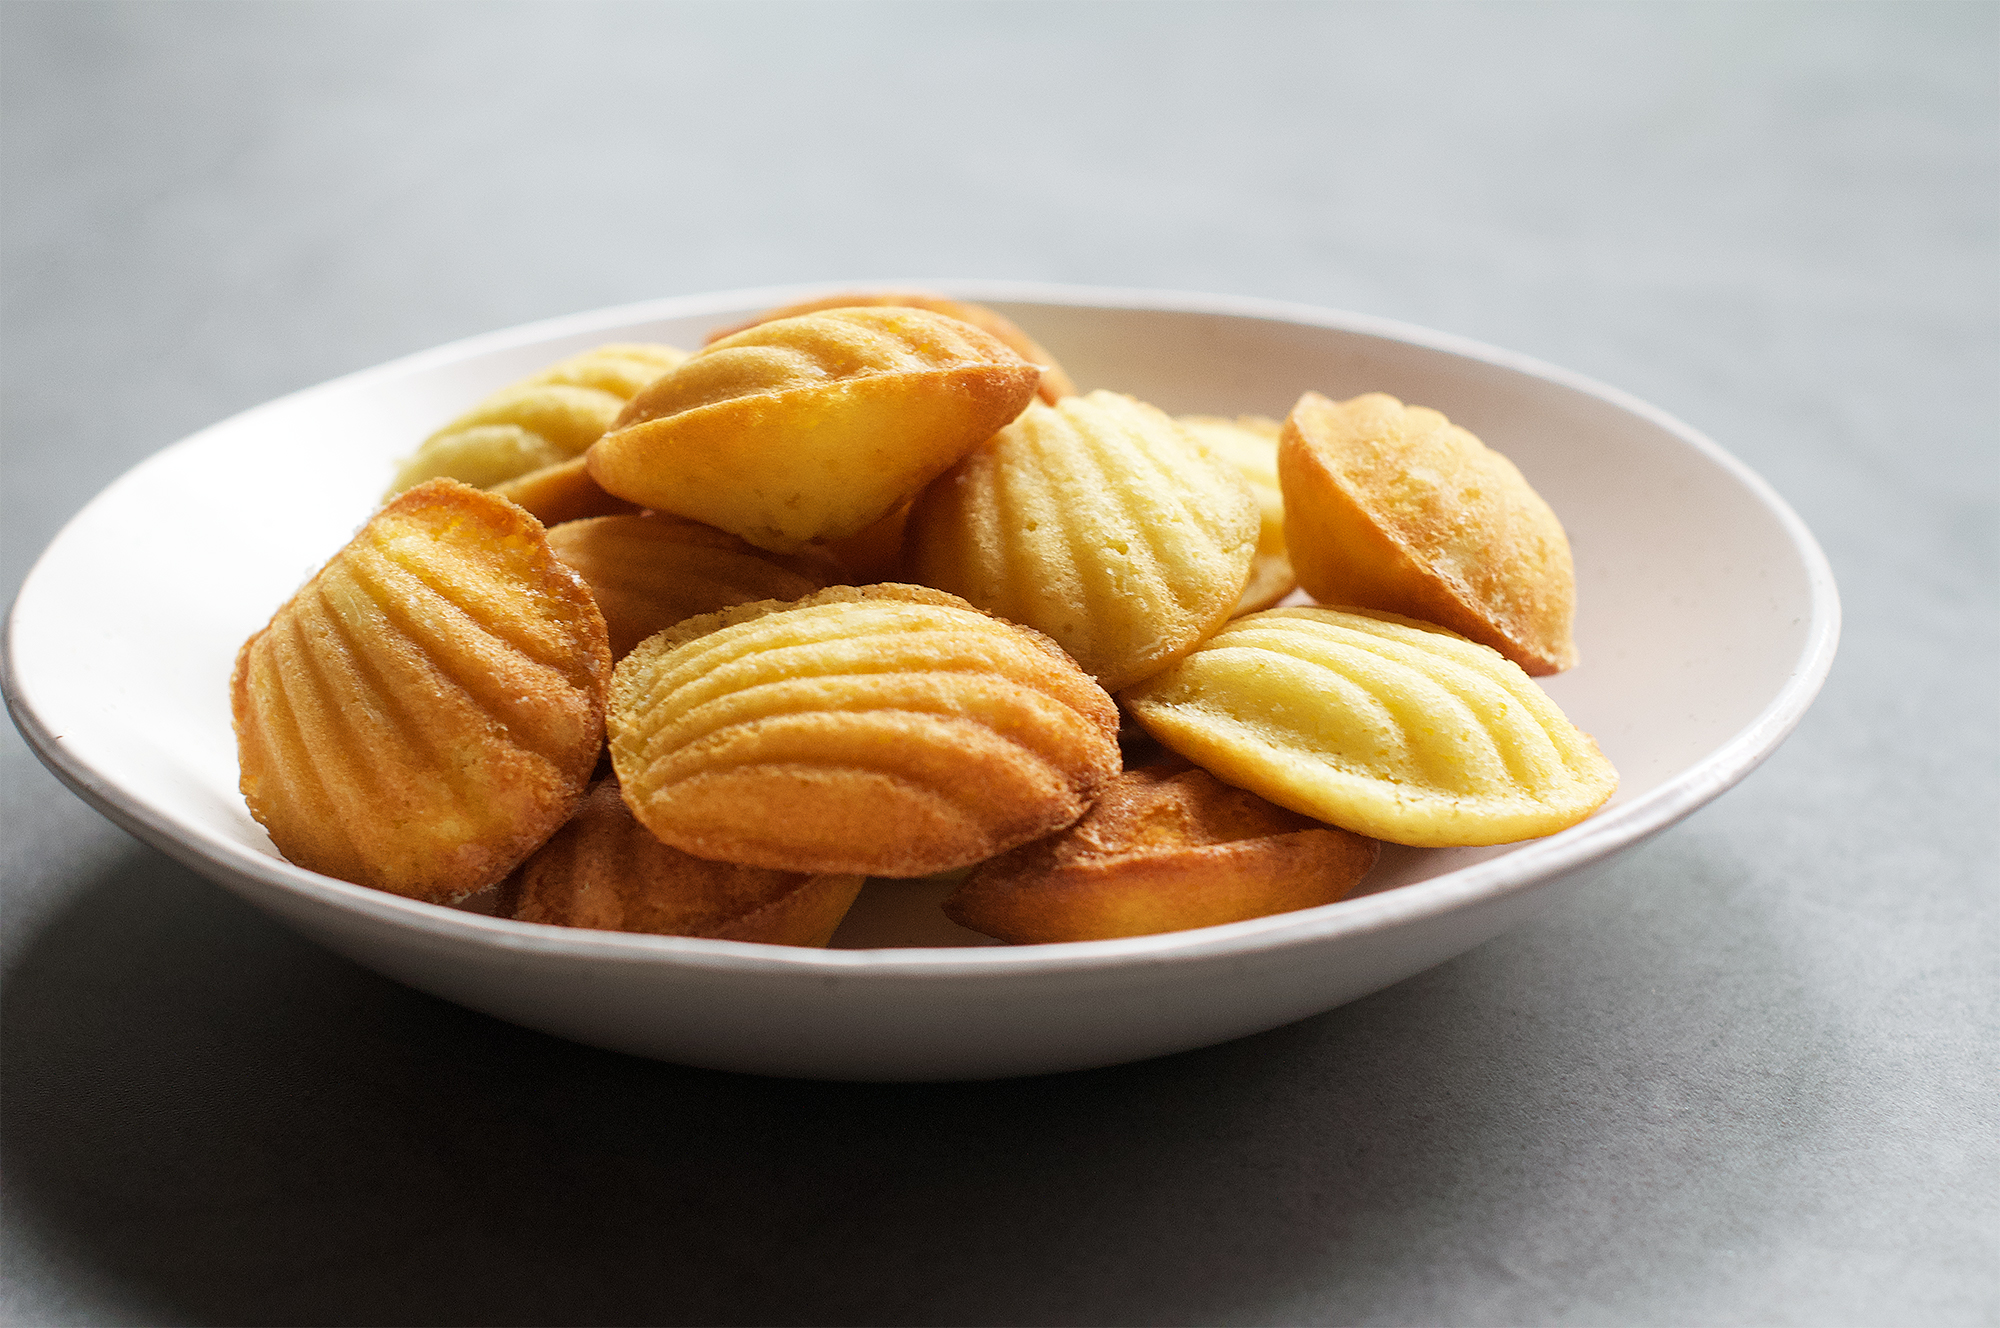 Recipe for homemade French madeleines